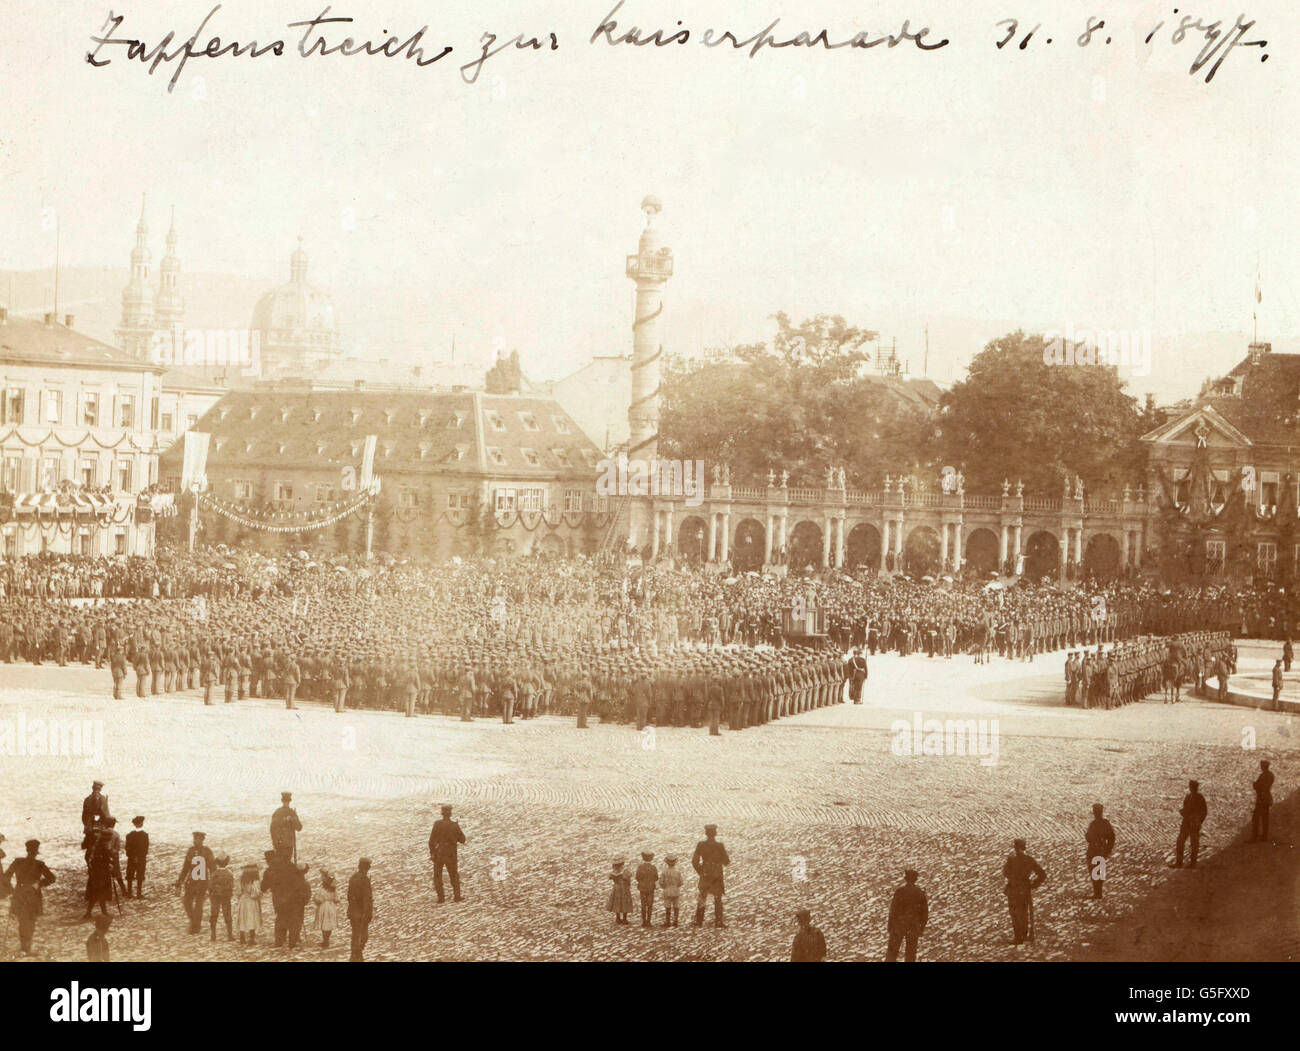 military, Germany, Bavaria, military tattoo after the Emperor's Parade, Wuerzburg, 31.8.1897, Additional-Rights-Clearences-Not Available Stock Photo